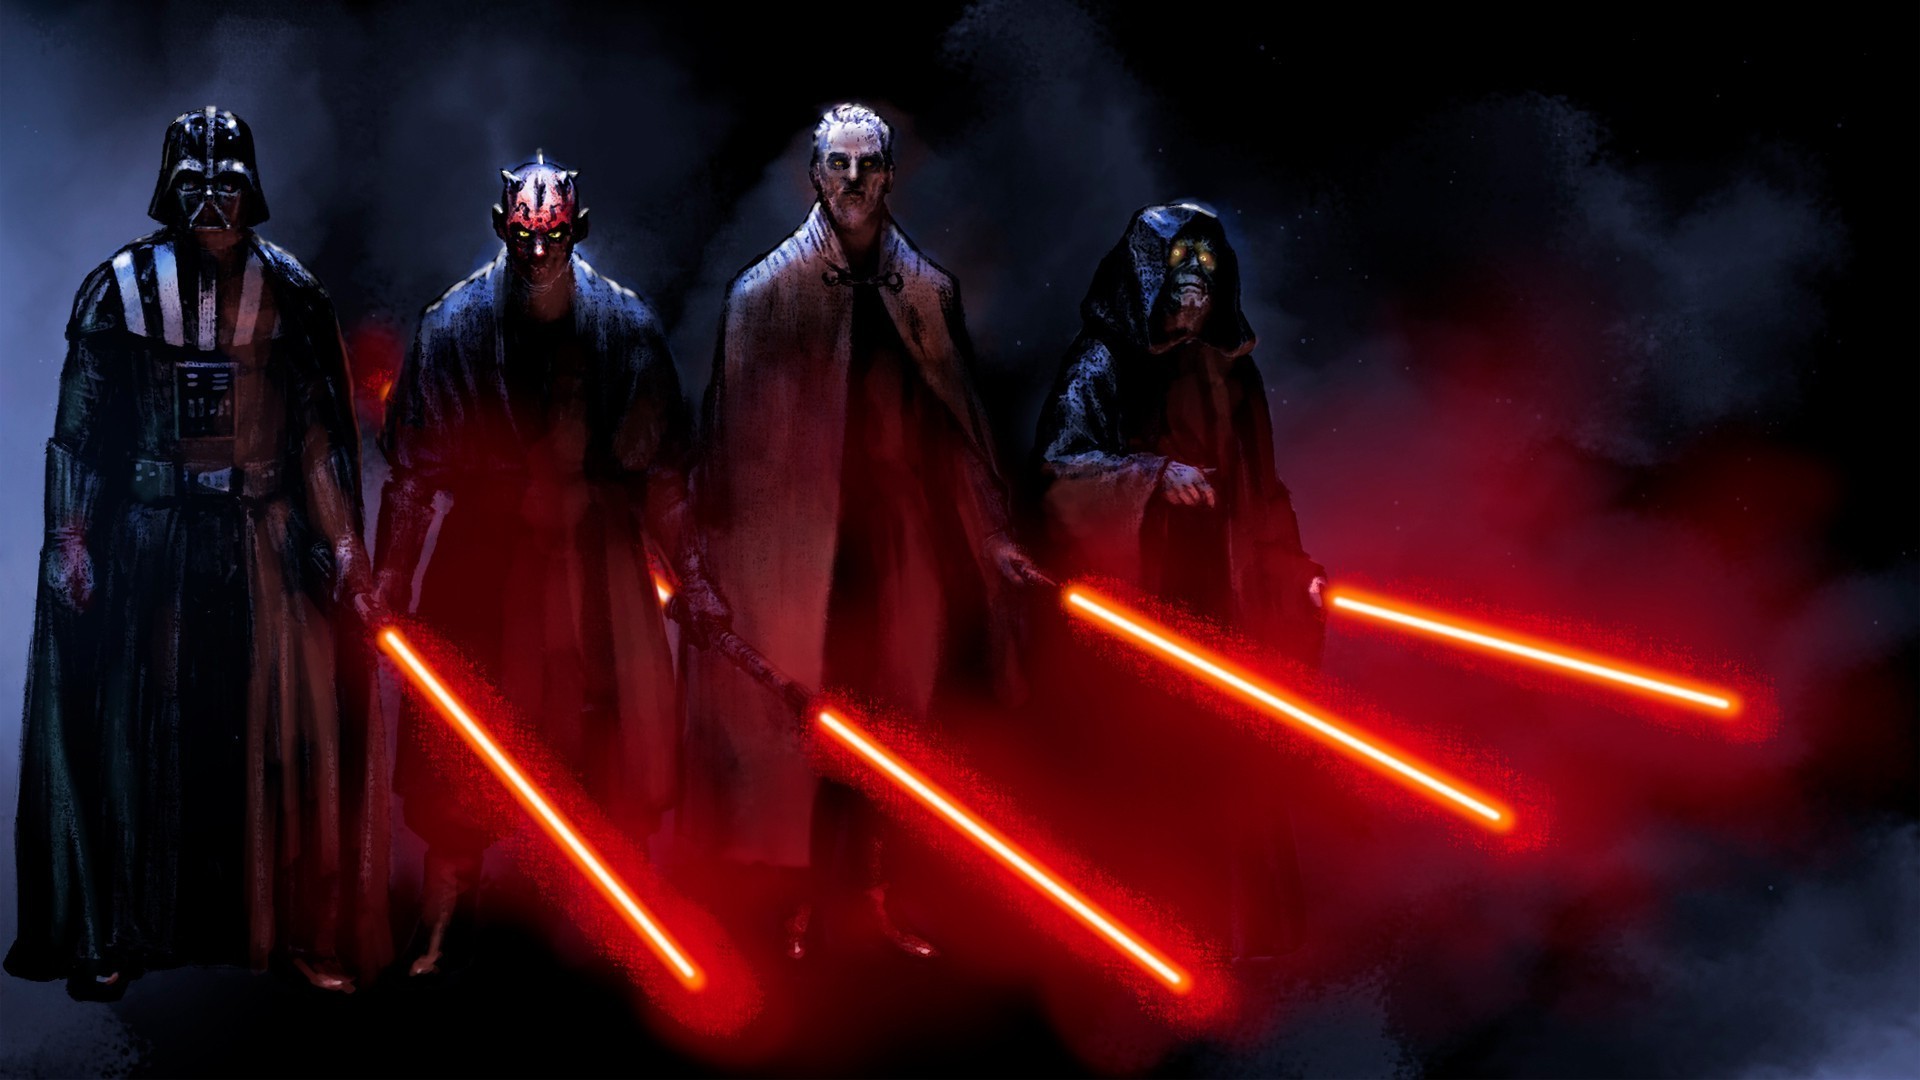 Star Wars images Darth Maul HD wallpaper and background photos | HD  Wallpapers | Pinterest | Darth maul wallpaper, Hd wallpaper and Wallpaper